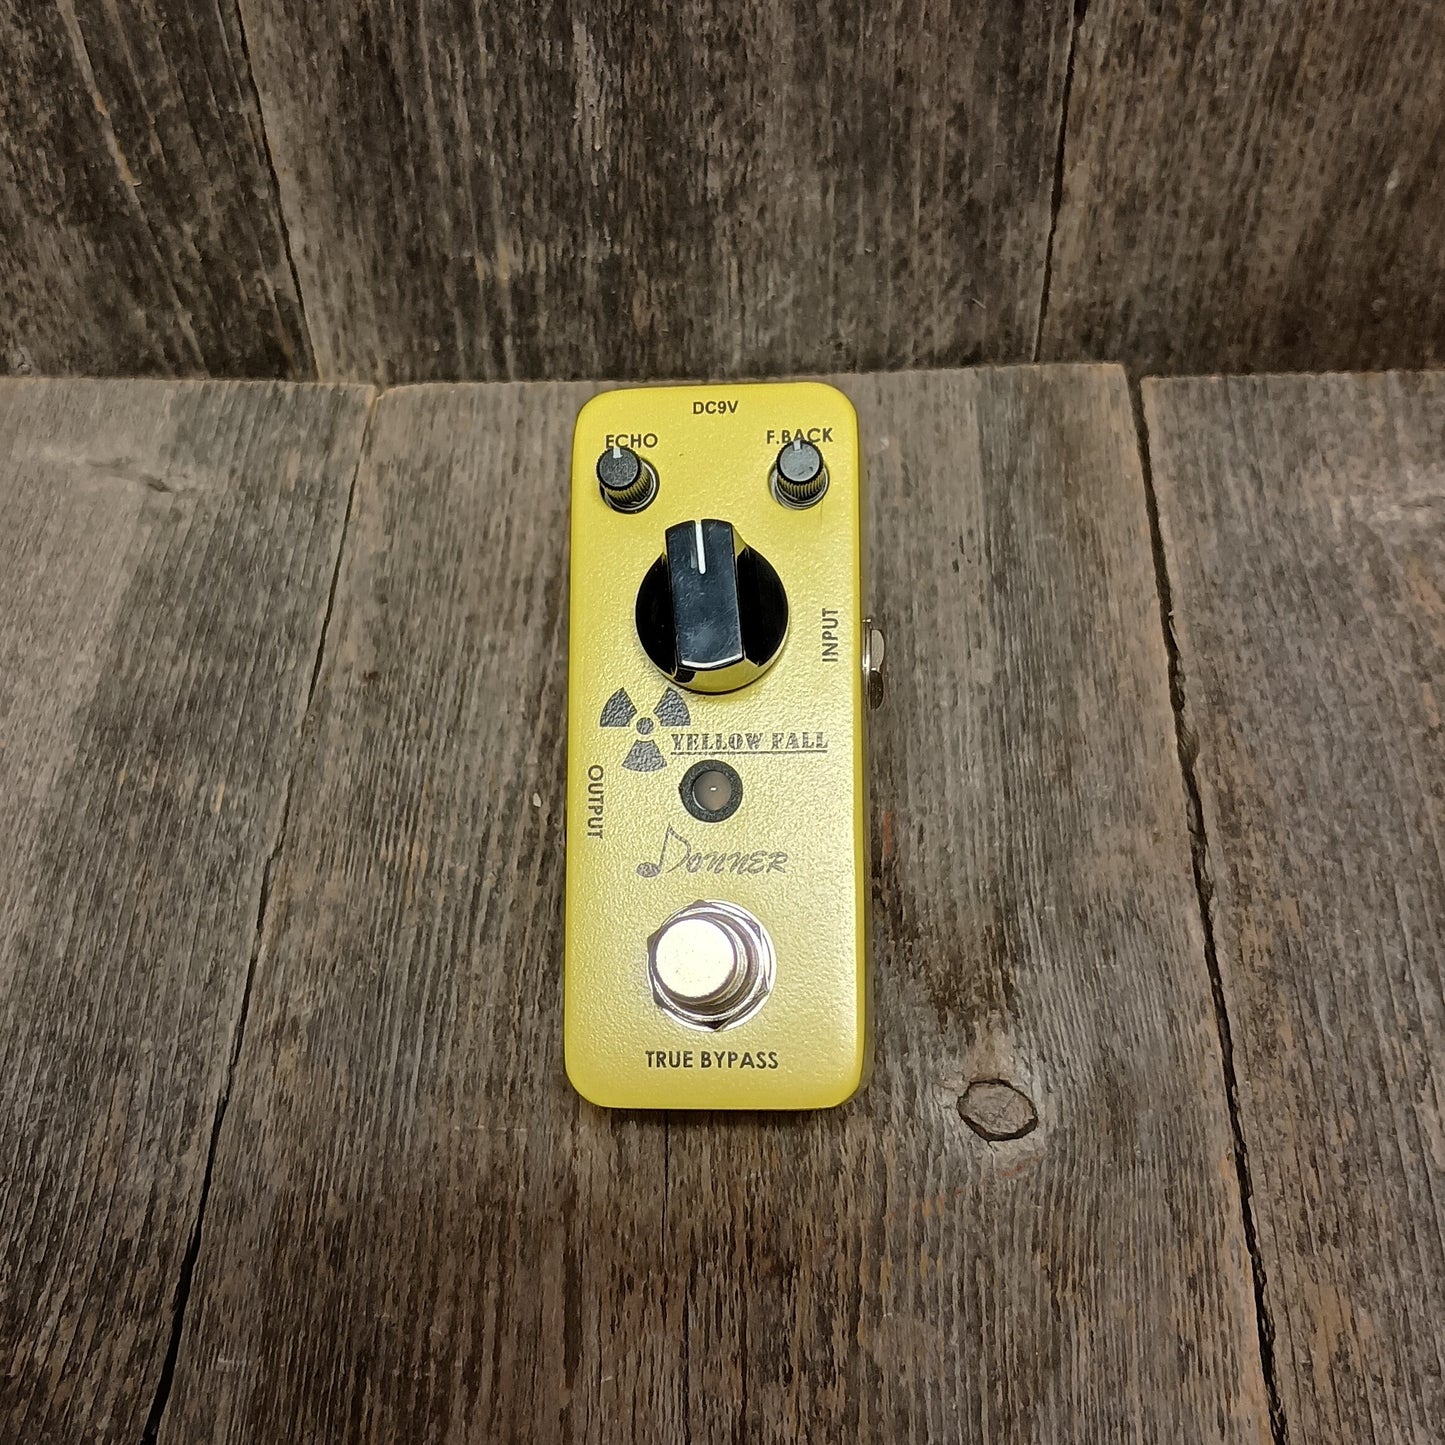 Donner Yellow Fall Analog Delay Guitar Effect Pedal Vintage Delay True Bypass - Used